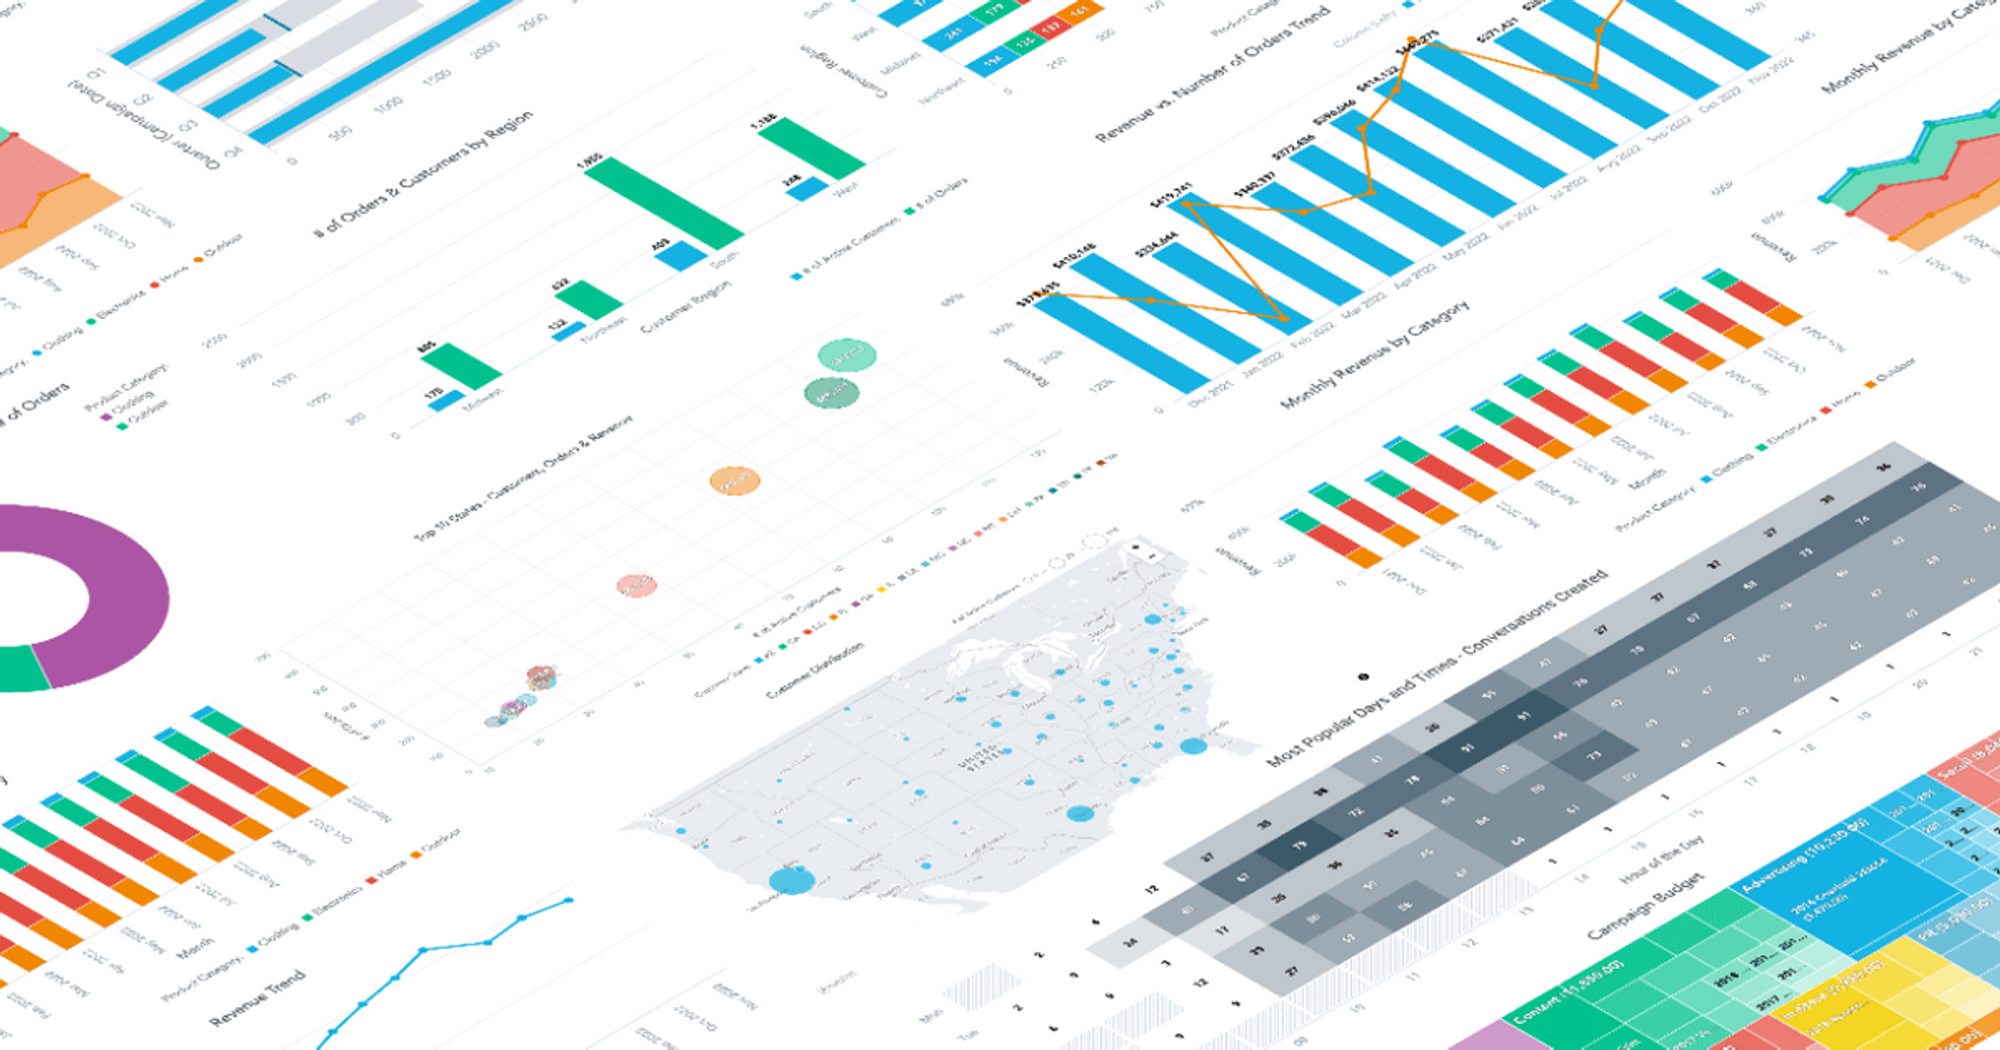 Choosing the right visualization is crucial to effective data storytelling